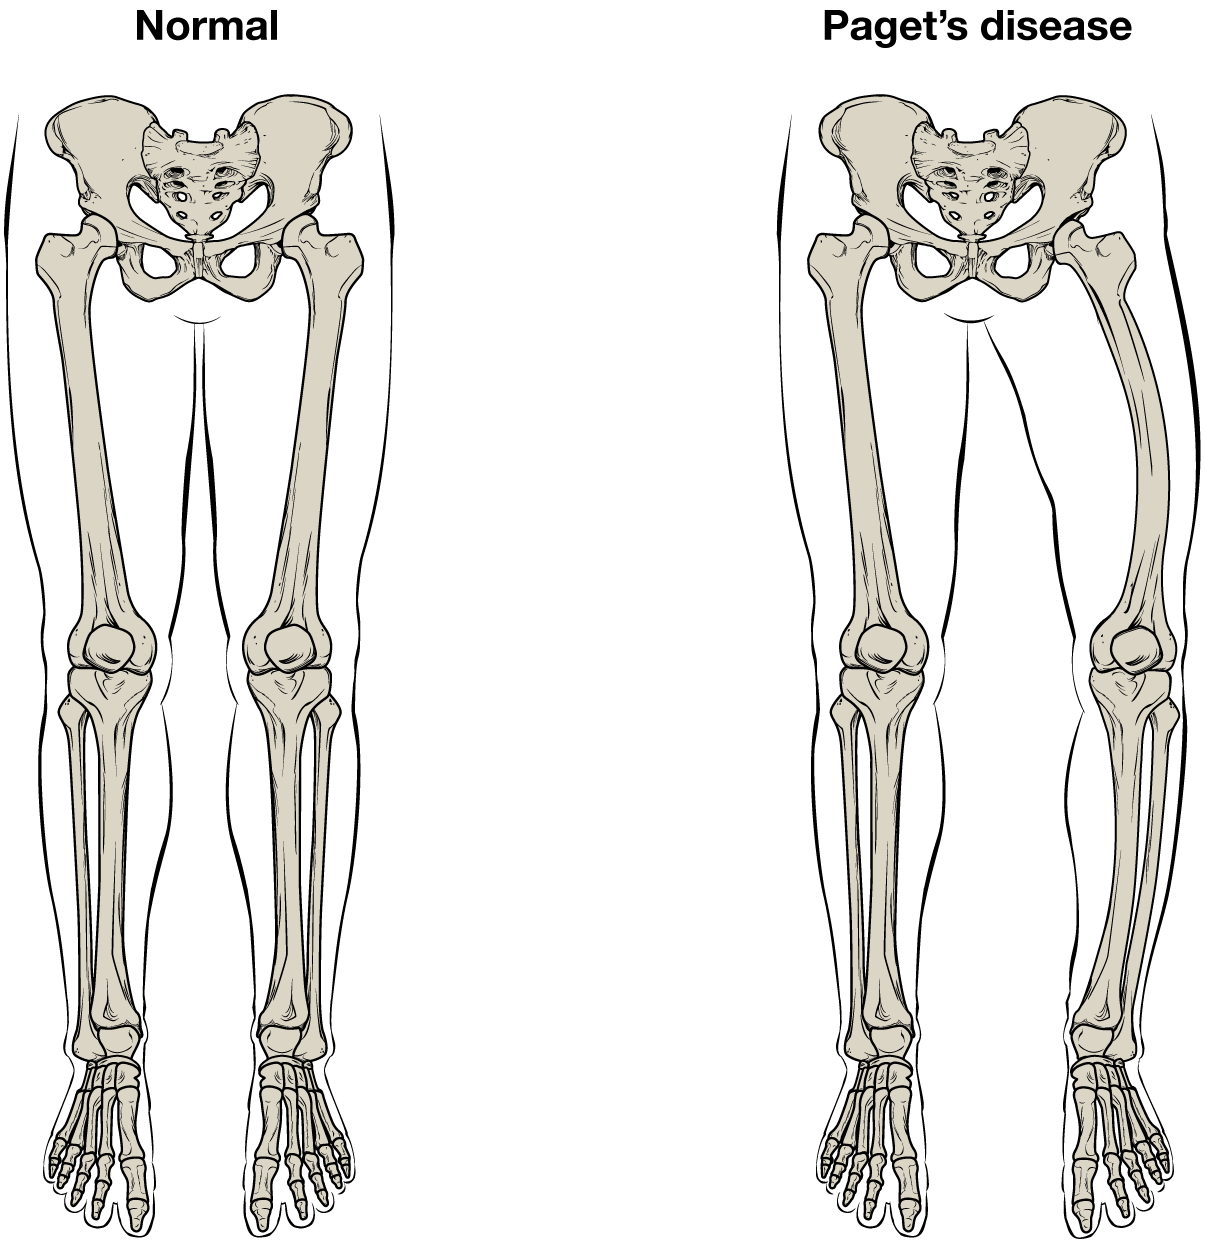 This illustration shows the normal skeletal structure of the legs from an anterior view. The flesh of the legs and feet are outlined around the skeleton for reference. A second illustration shows the legs of someone with Paget’s disease. The affected person’s left femur is curved outward, causing the left leg to be bowed and shorter than the right leg.